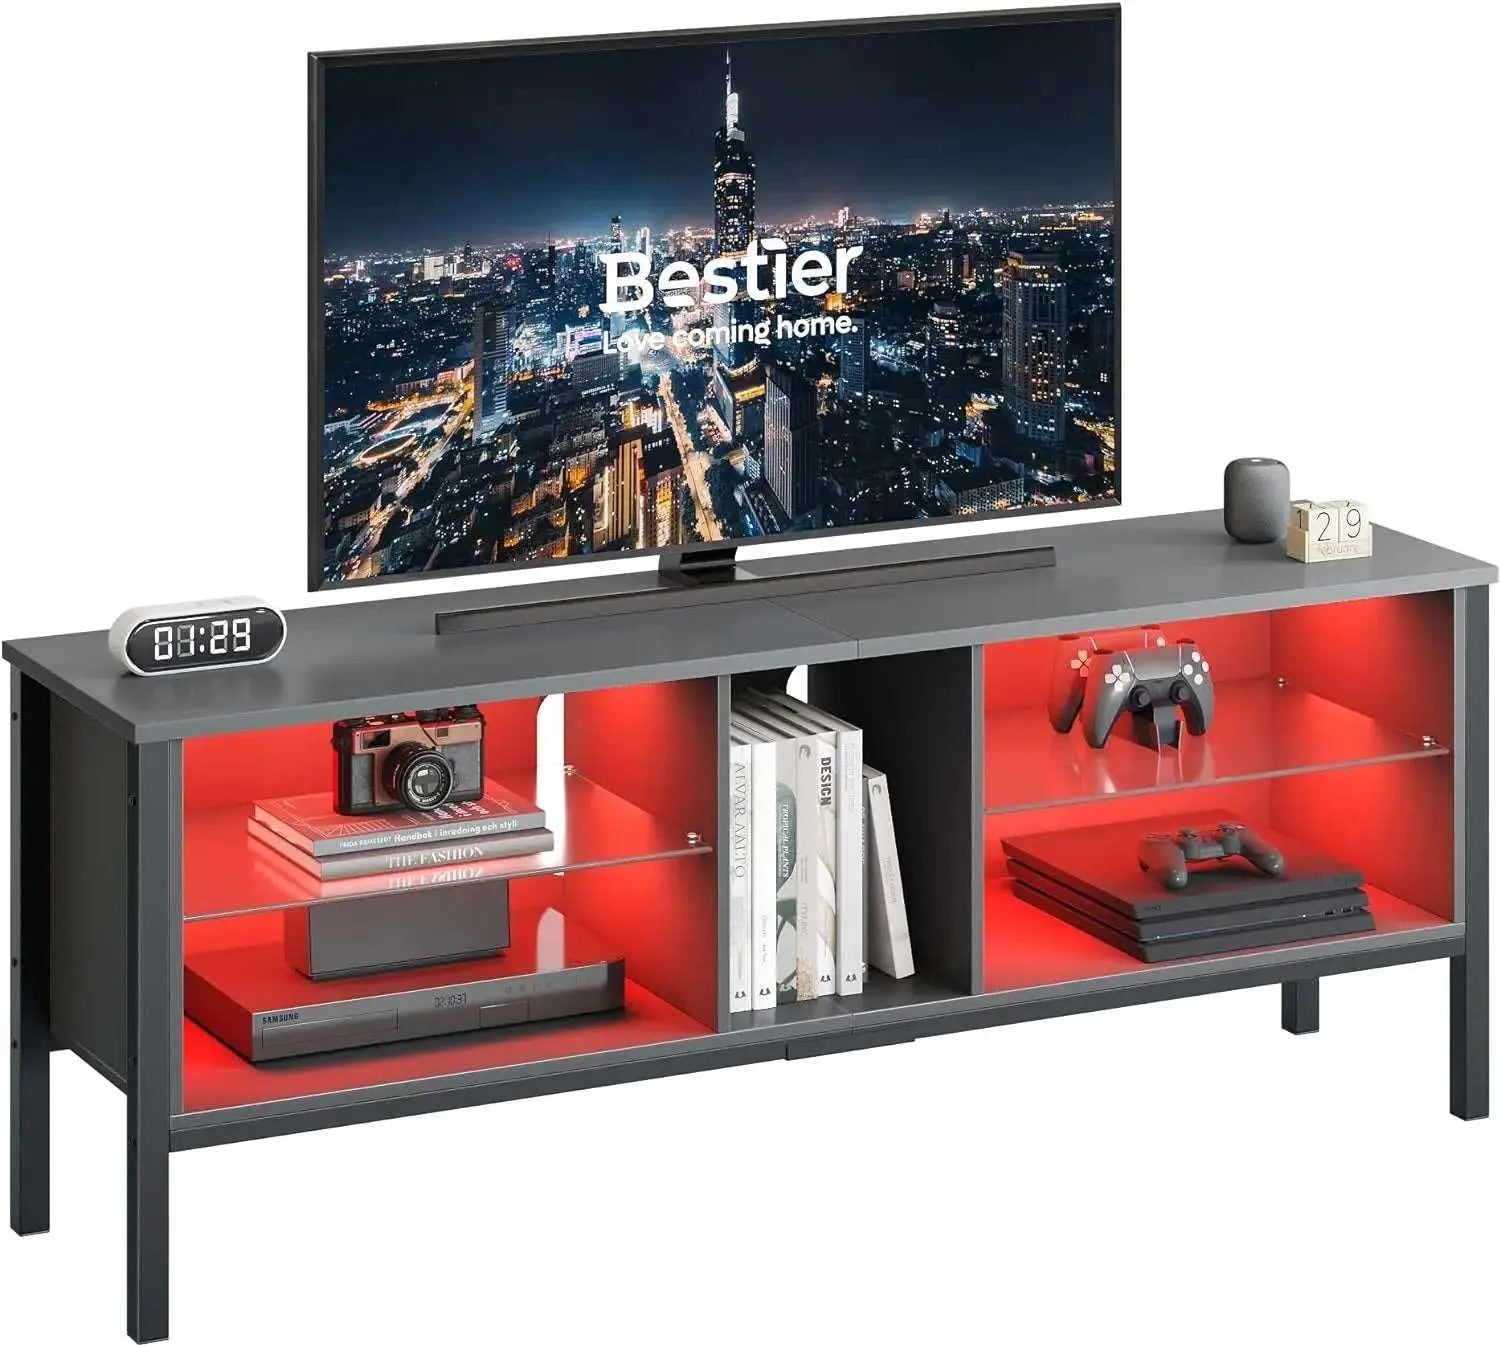 Bestier Gaming TV Stand of grey for 70 Inch TV, Gaming Entertainment Center with LED Lights for PS4 Bestier